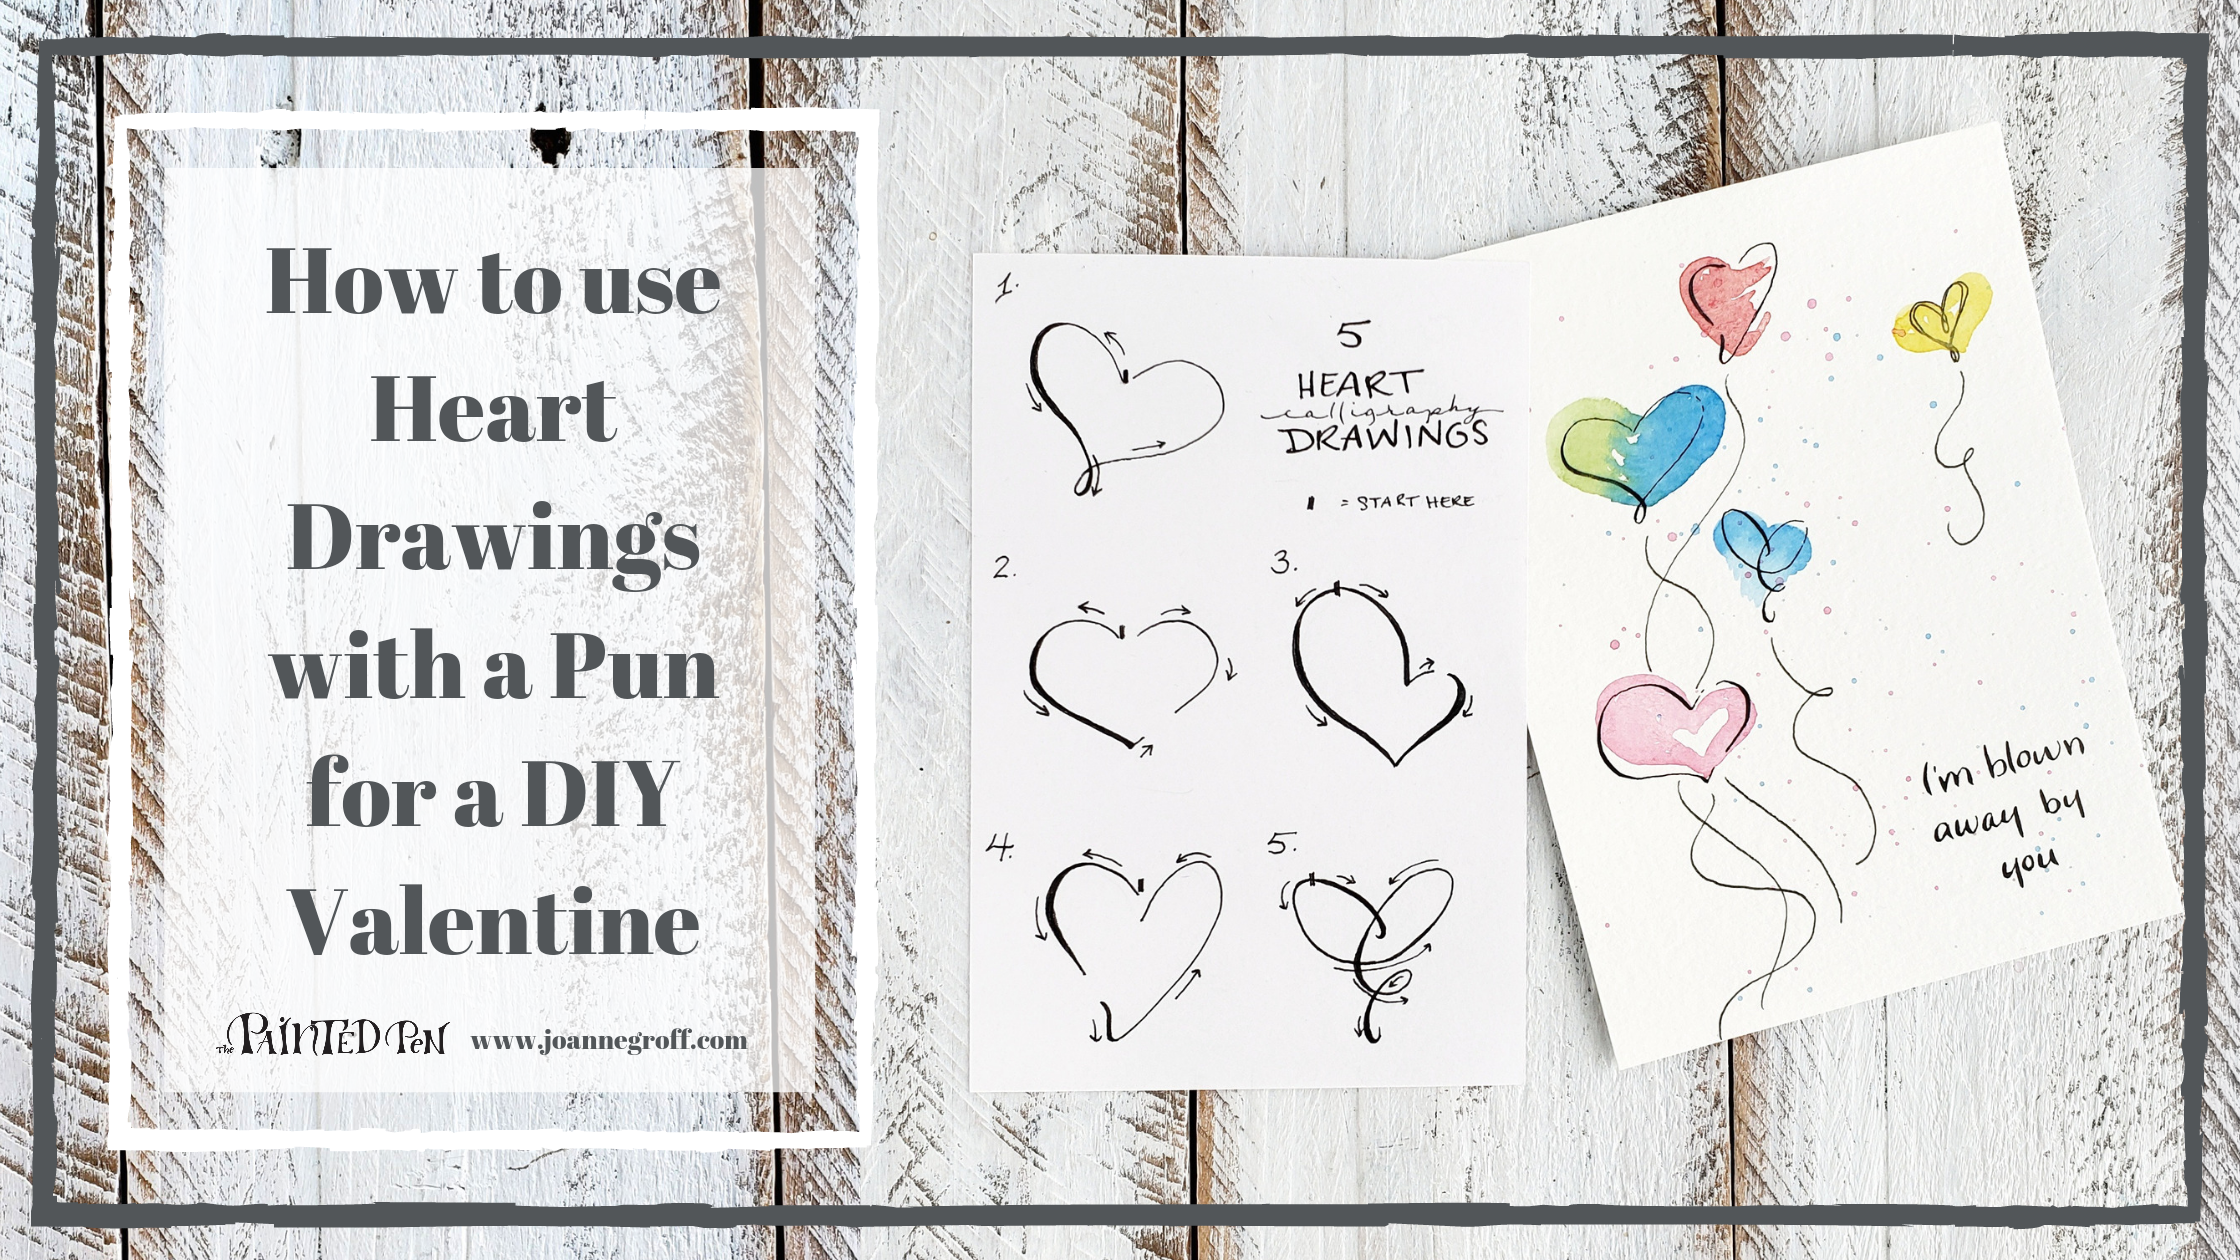 How to use heart drawings with a pun for a DIY valentine